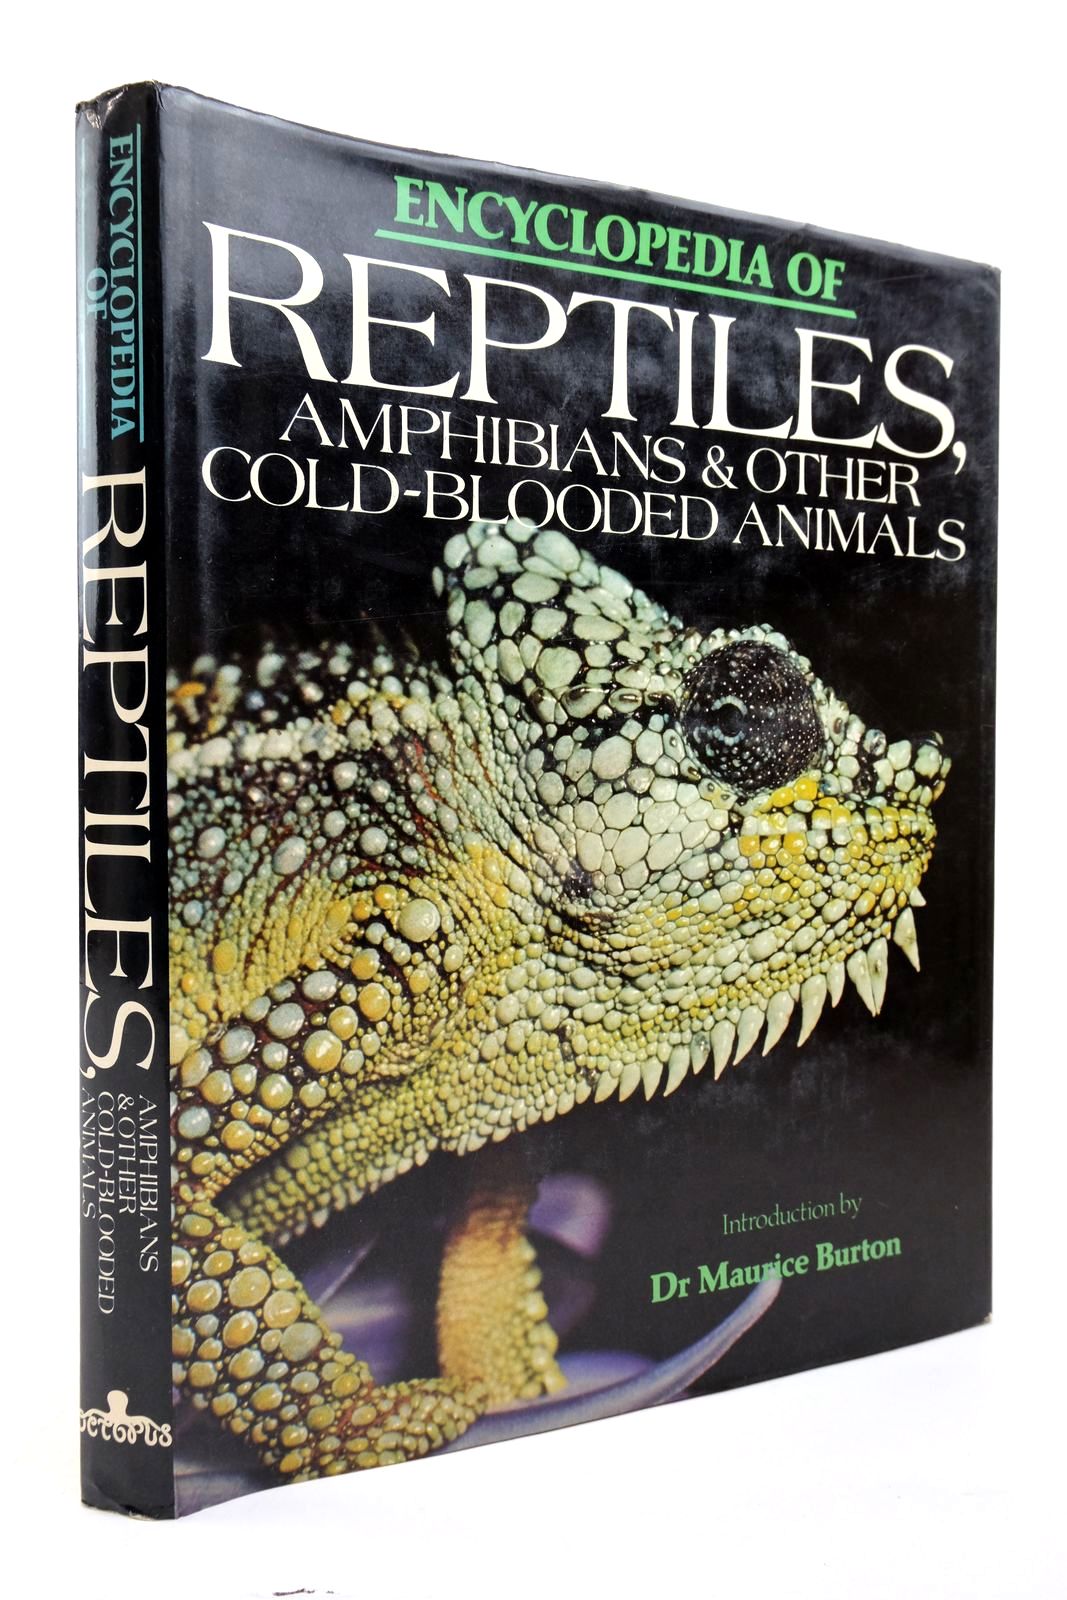 Photo of ENCYCLOPEDIA OF REPTILES, AMPHIBIANS &amp; OTHER COLD-BLOODED ANIMALS written by Burton, Maurice published by Octopus Books Ltd. (STOCK CODE: 2139211)  for sale by Stella & Rose's Books